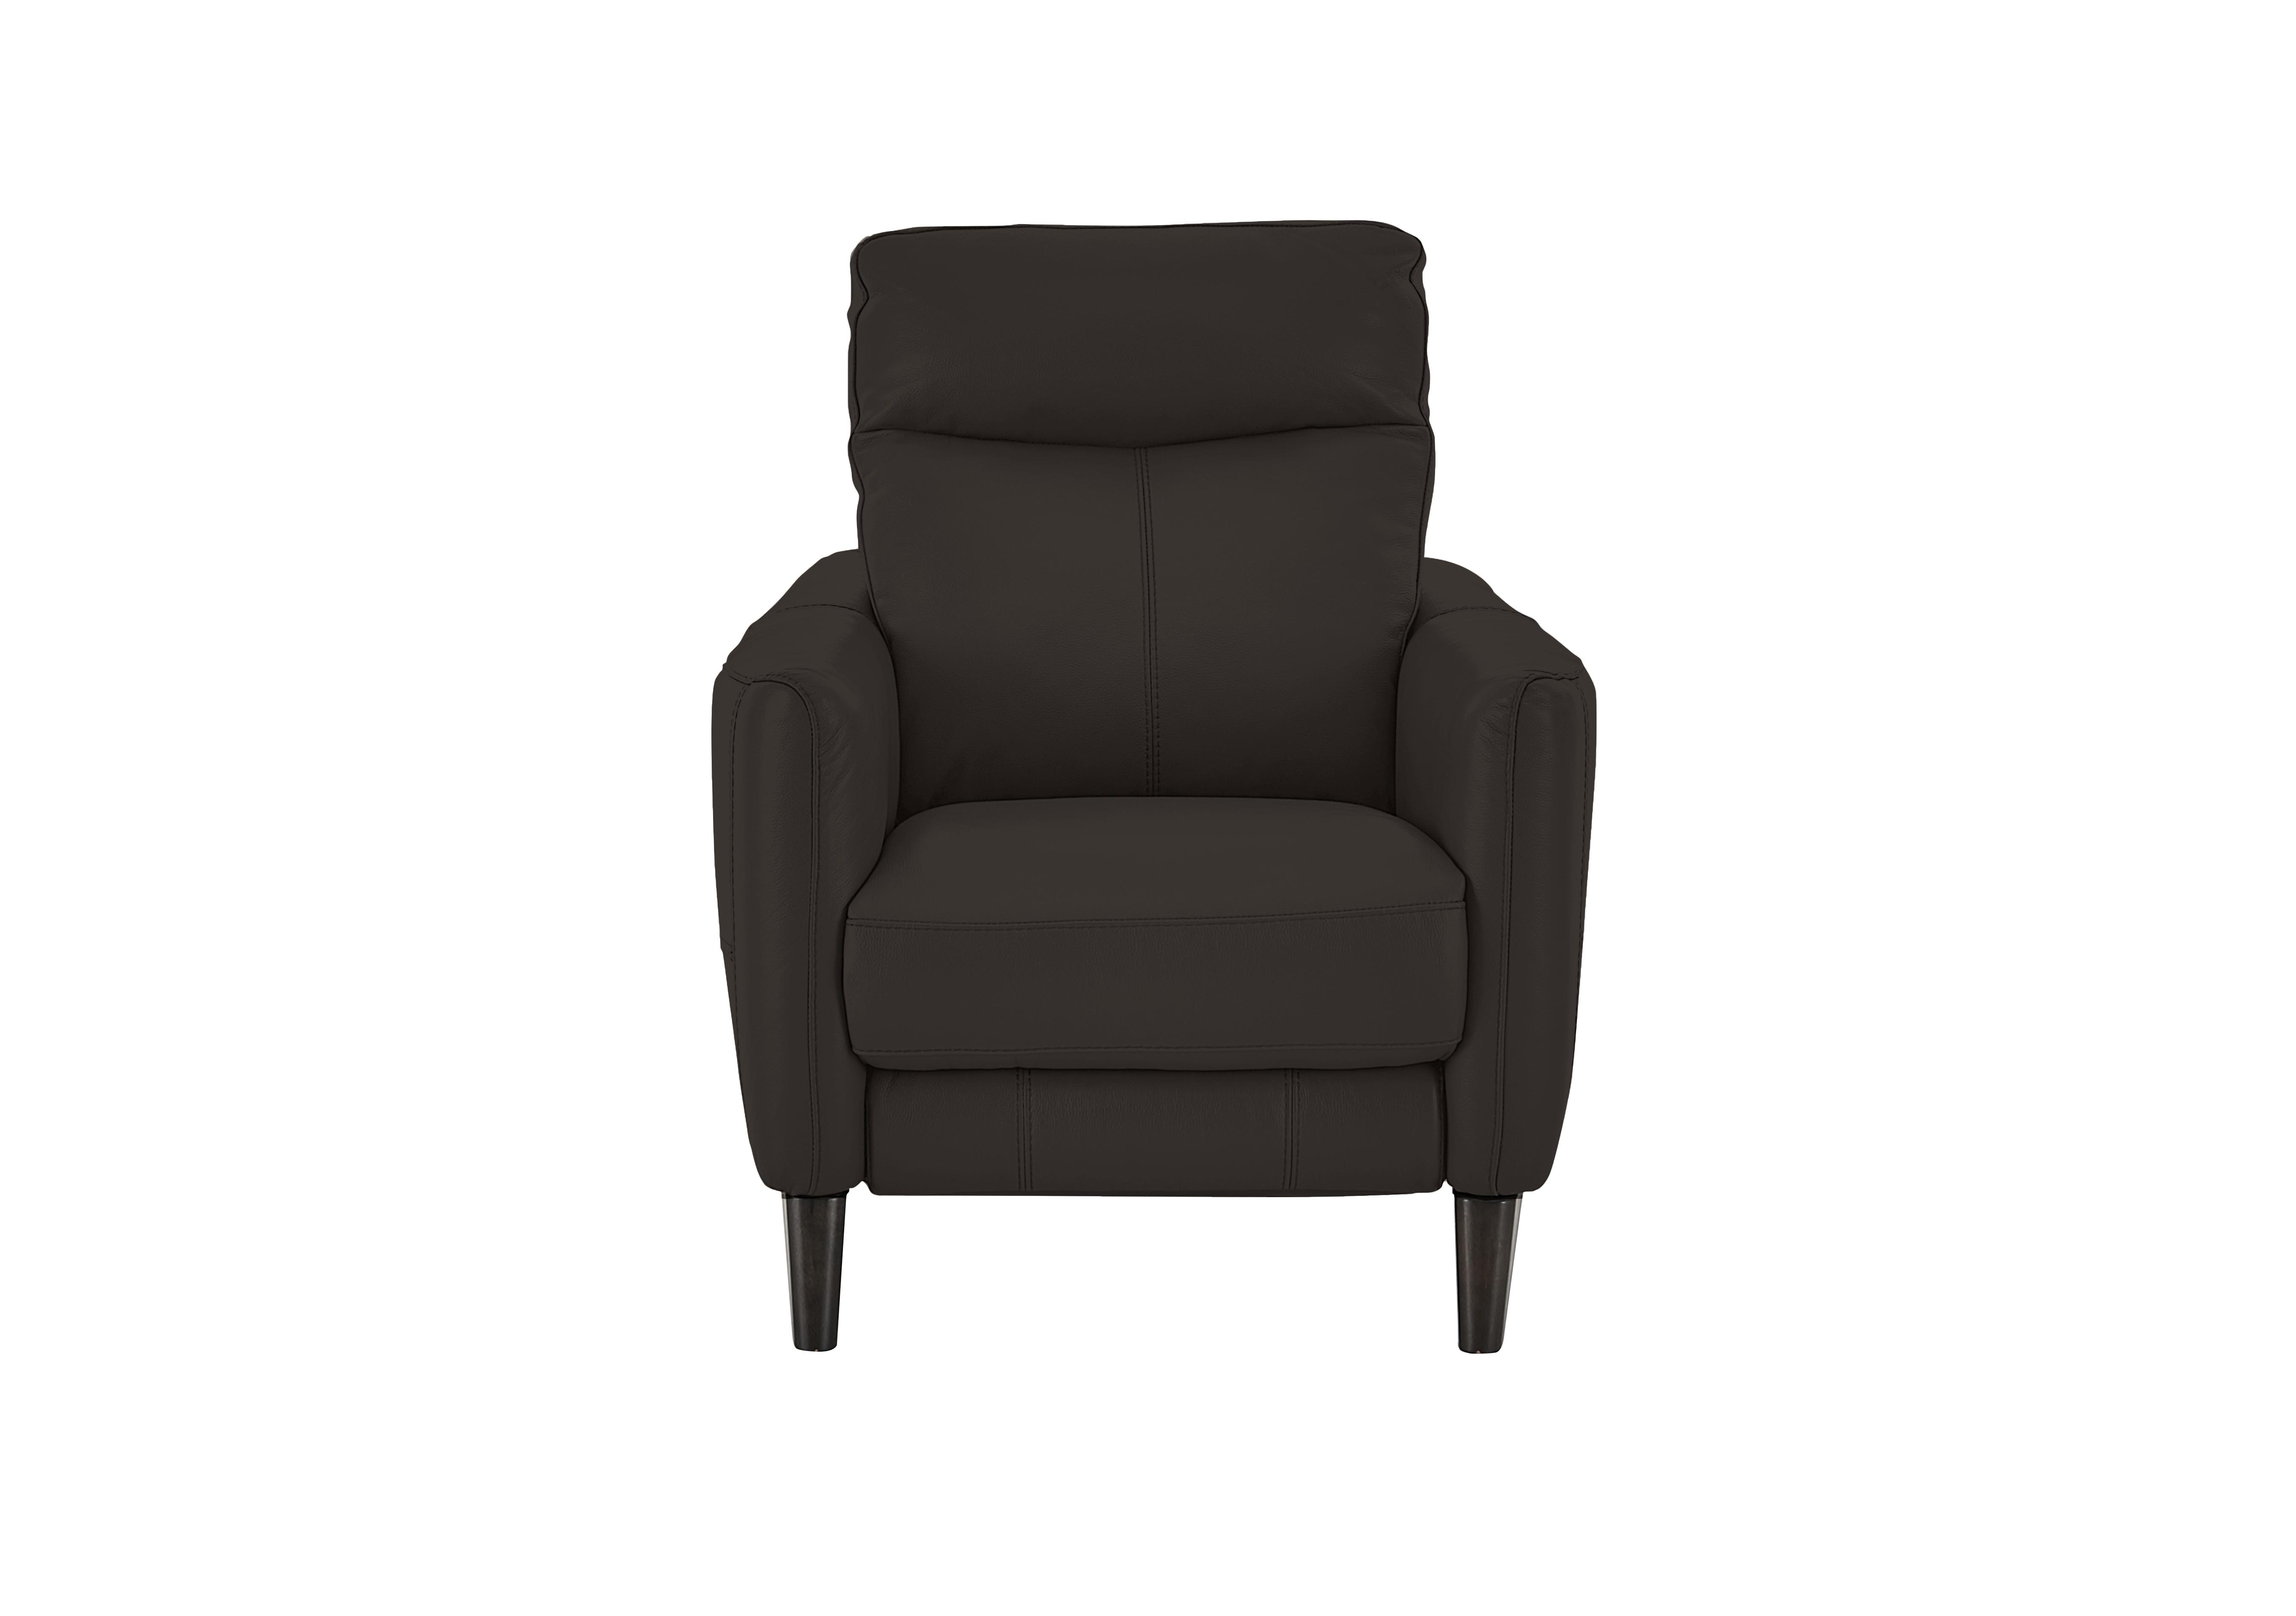 Compact Collection Petit Leather Recliner Armchair in Bv-1748 Dark Chocolate on Furniture Village